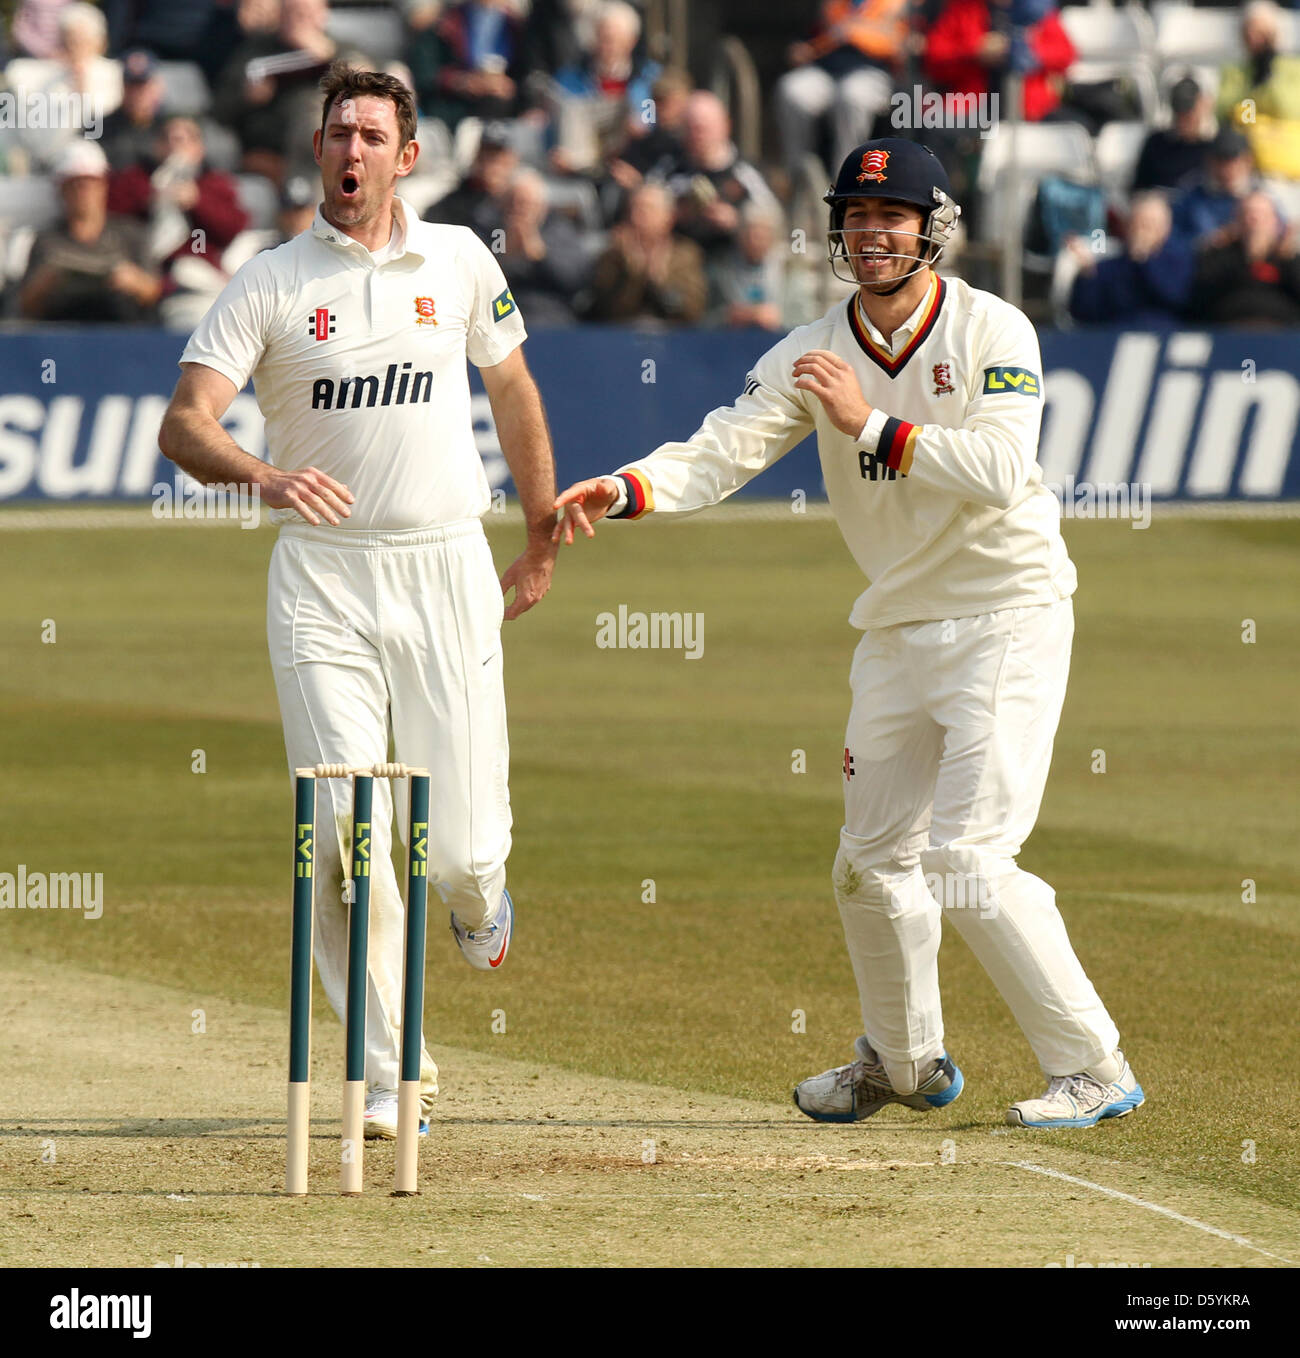 Chelmsford, Essex, UK. 10th April 2013. David Masters and Ben Foakes celebrate the first wicket of the season (Chris Dent) LV County Championship -  Essex CCC vs Gloucestershire CCC. Credit: Action Plus Sports Images / Alamy Live News Stock Photo